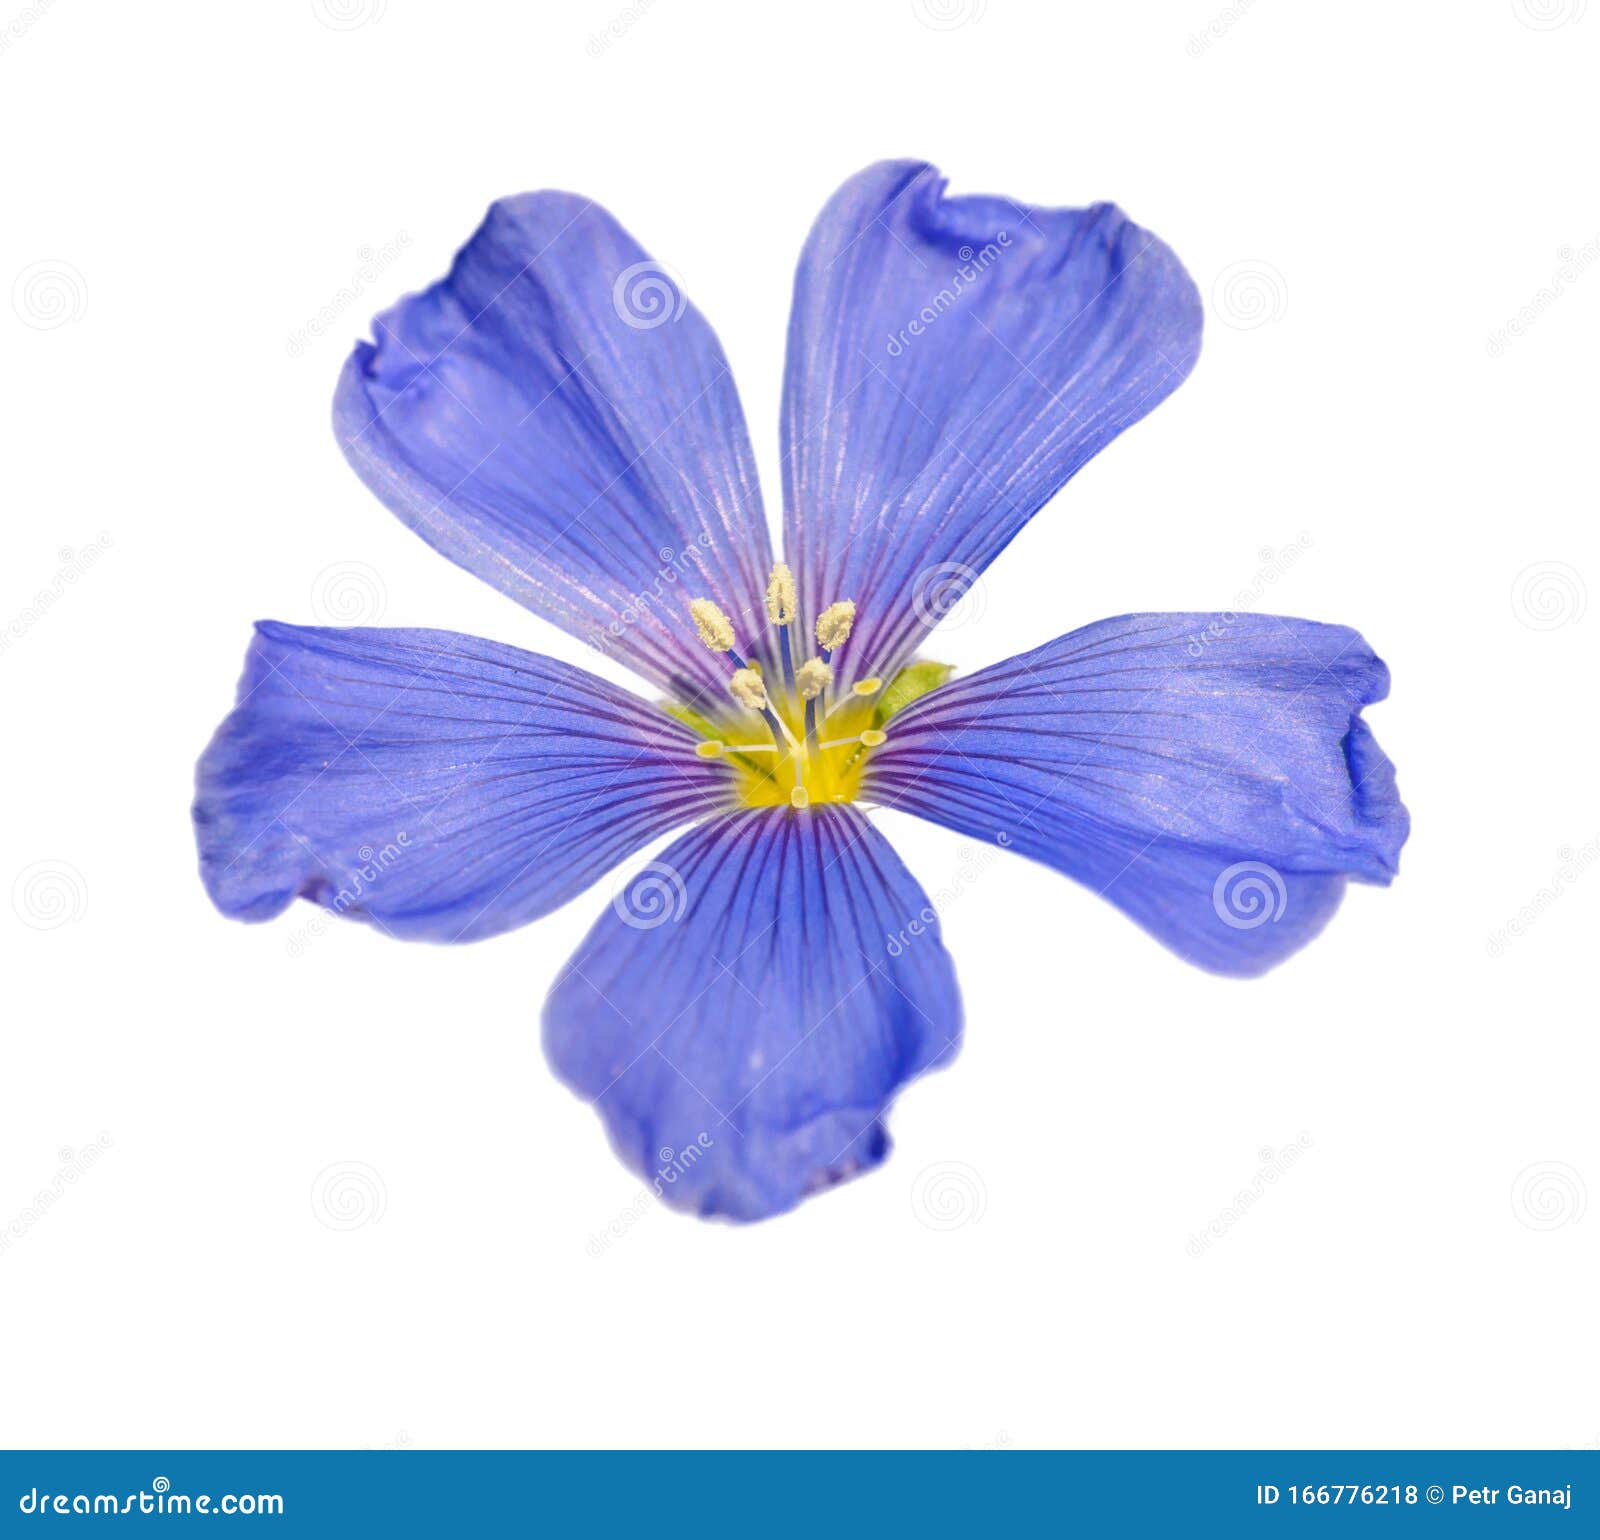 Blue Flax Flower Closeup on White Background Stock Photo - Image of ...